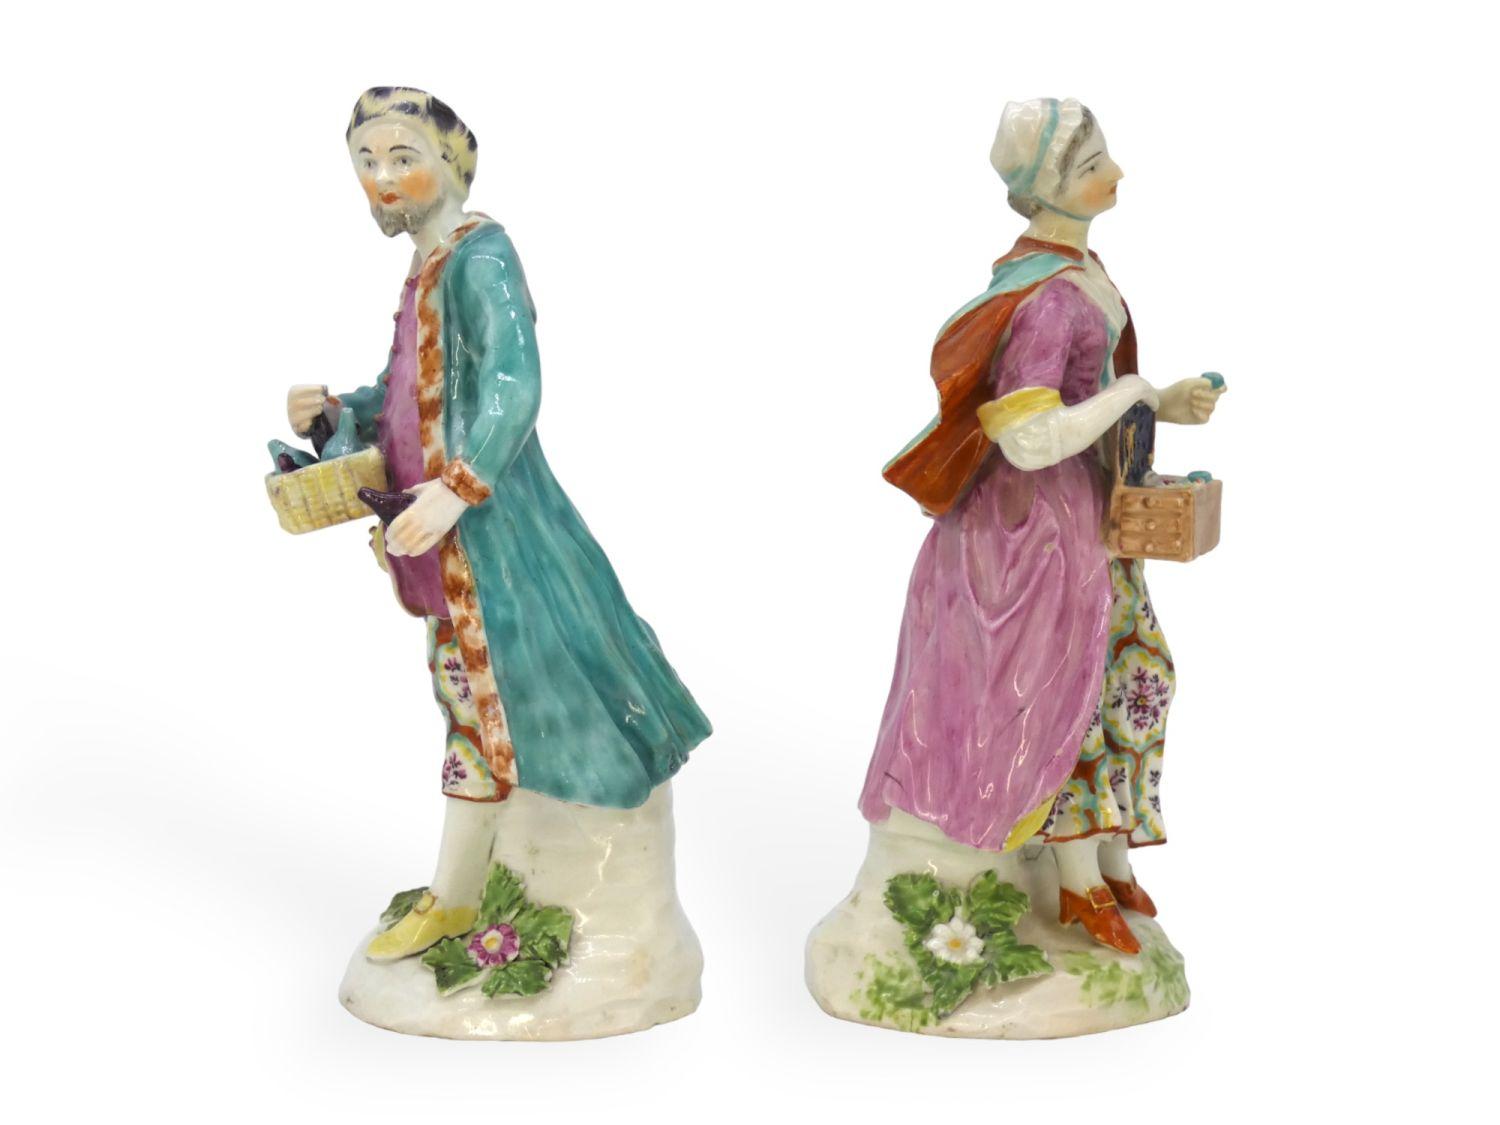 Figures of a Jewish Peddler and his Wife, Derby, England, Circa 1770
This pair of Derby ware figures, dating from around 1760, represent an increasingly visible sight in 18th century England: the Jewish peddler.



Although these figures look